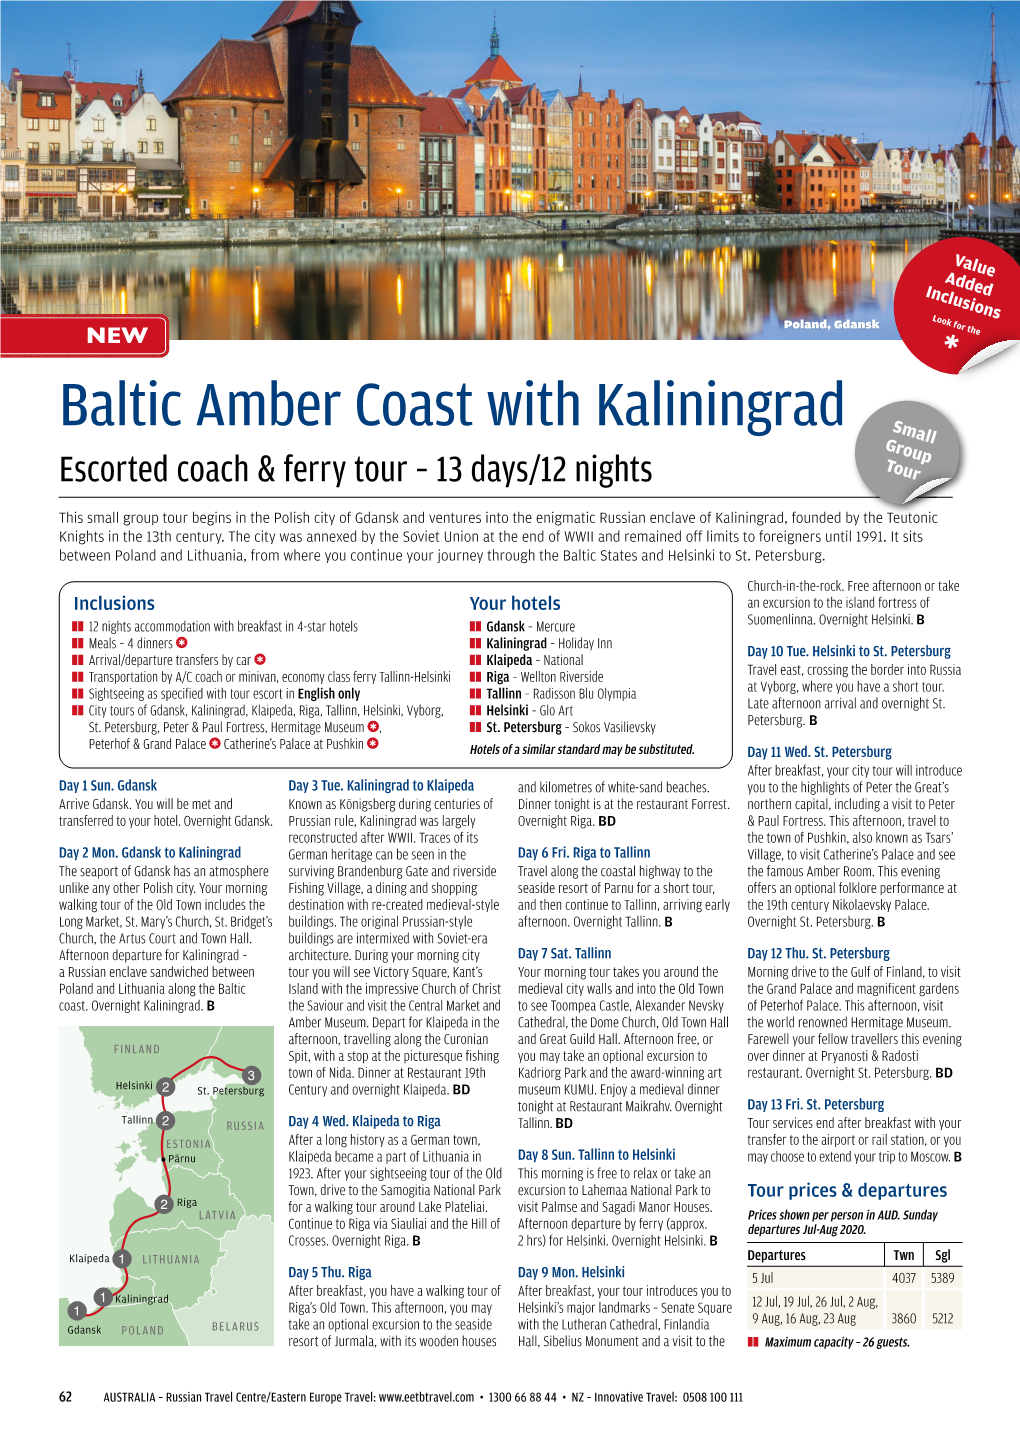 Baltic Amber Coast with Kaliningrad Small Group Escorted Coach & Ferry Tour – 13 Days/12 Nights Tour